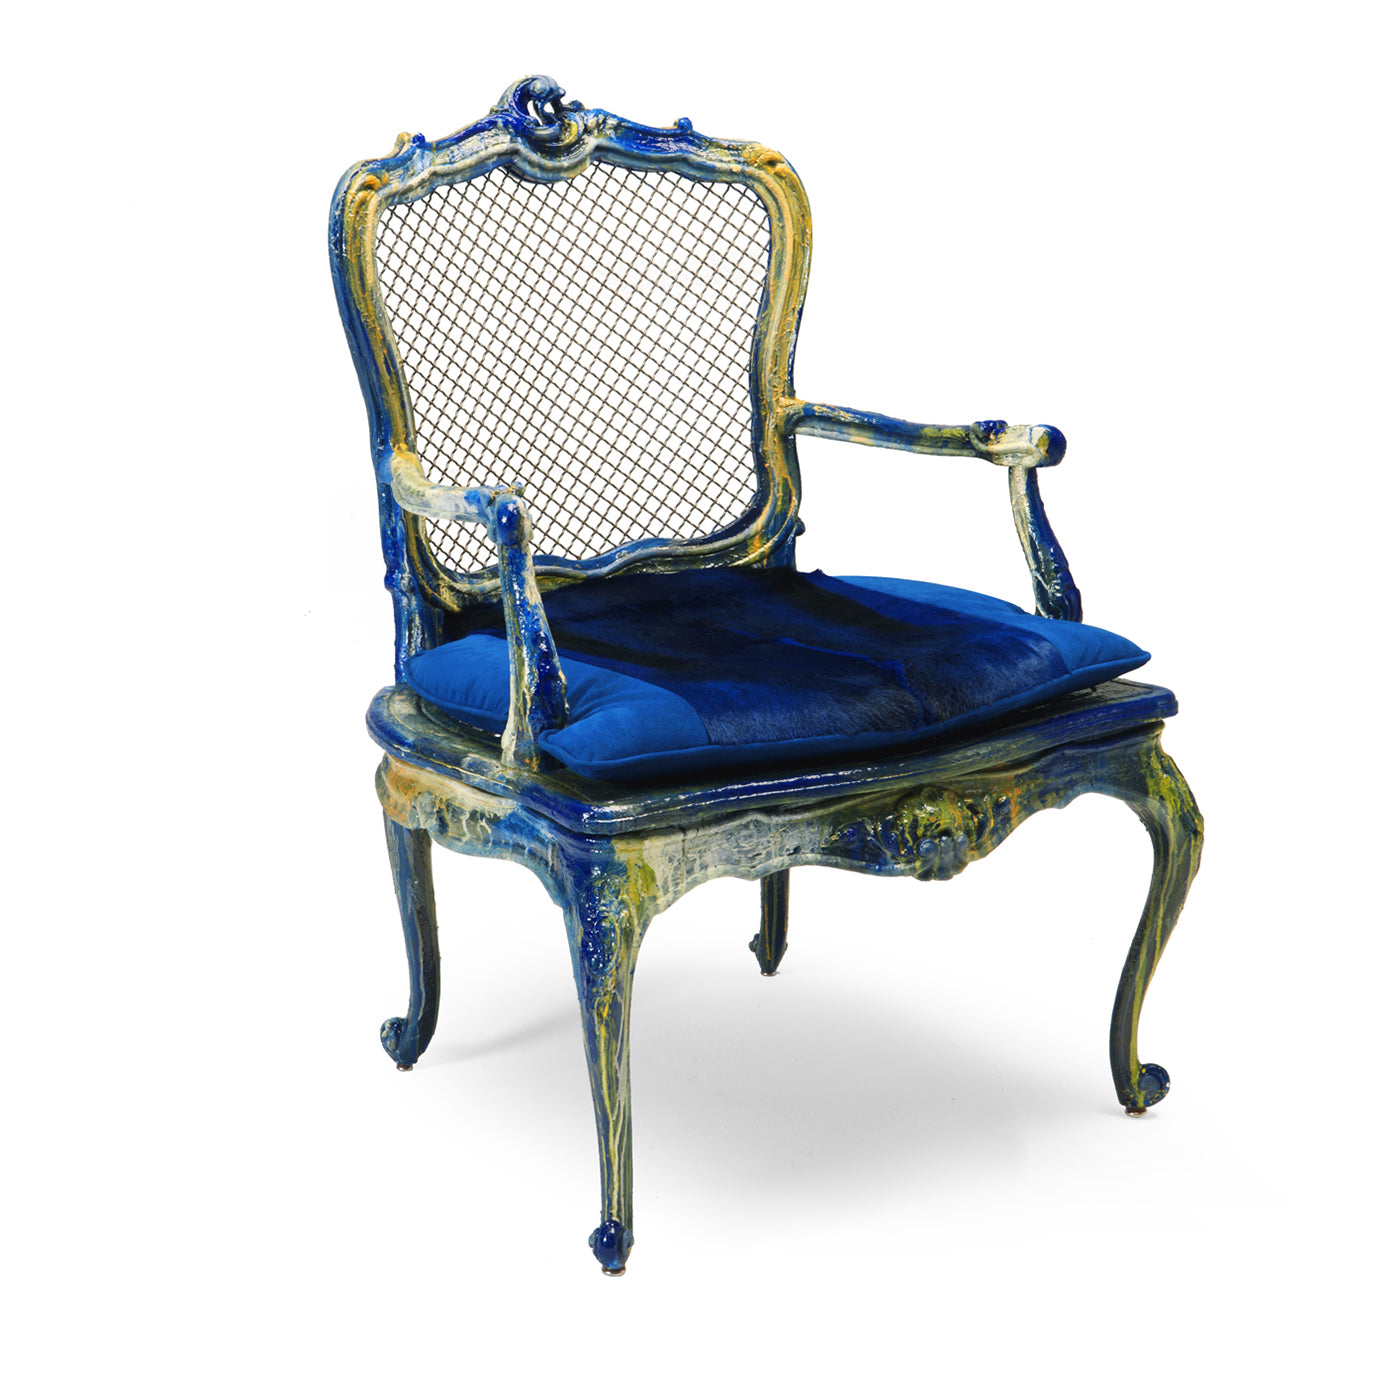 Coupe d'Artiste Princess Chair by Carlo Rampazzi - Alternative view 2